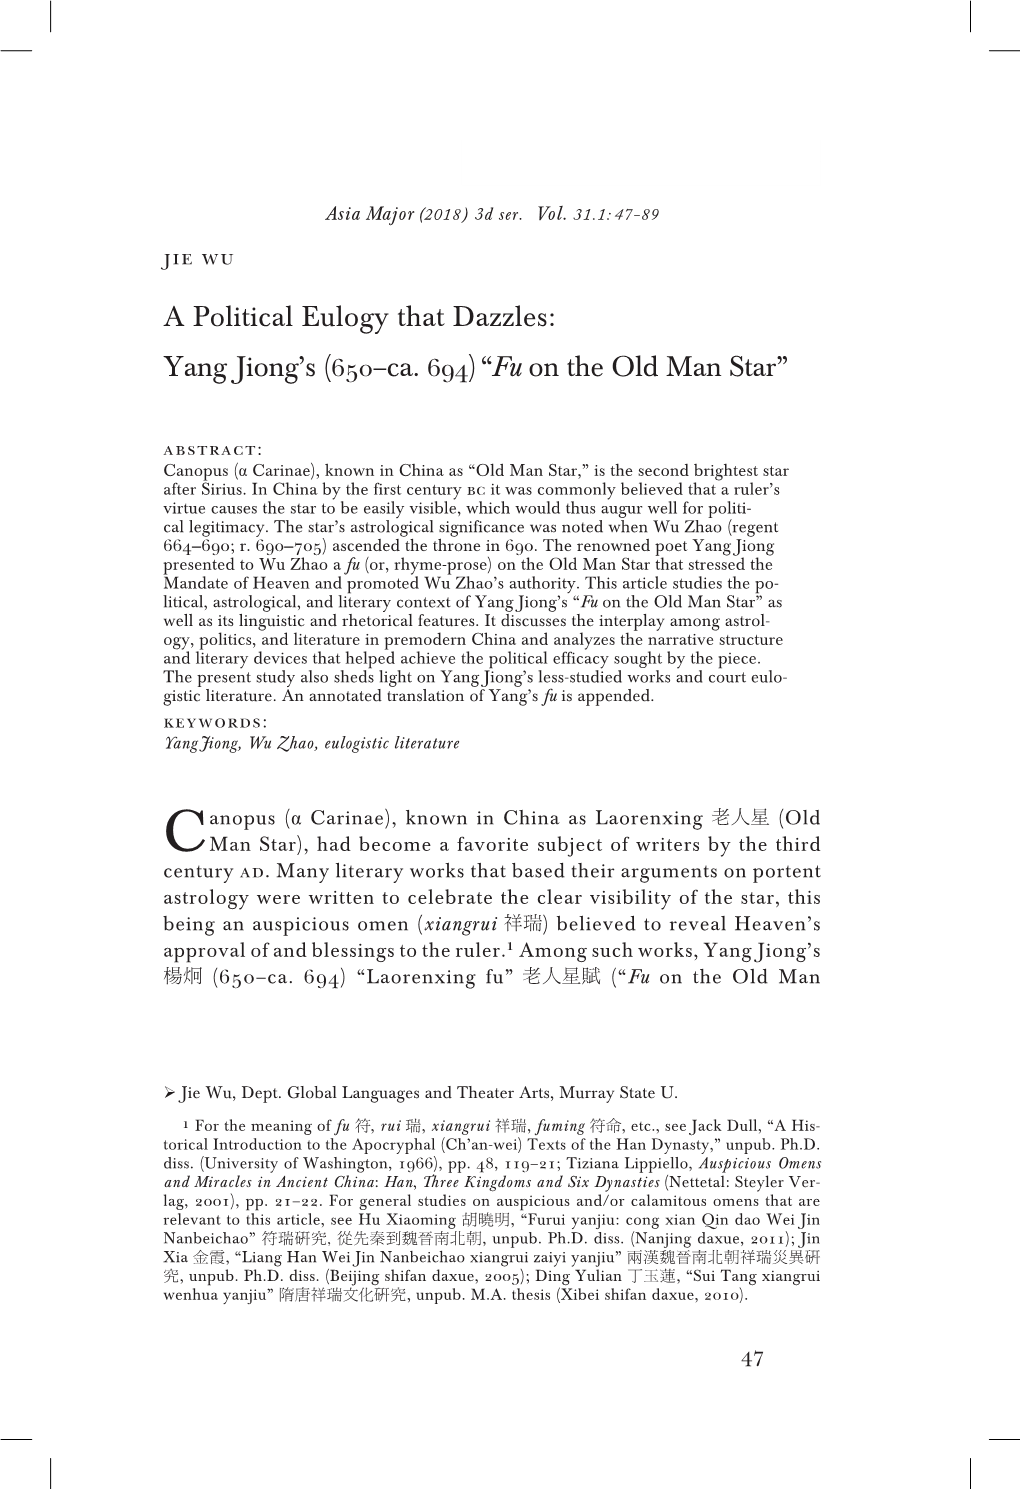 A Political Eulogy That Dazzles: Yang Jiong's (650–Ca. 694) “Fu on the Old Man Star”